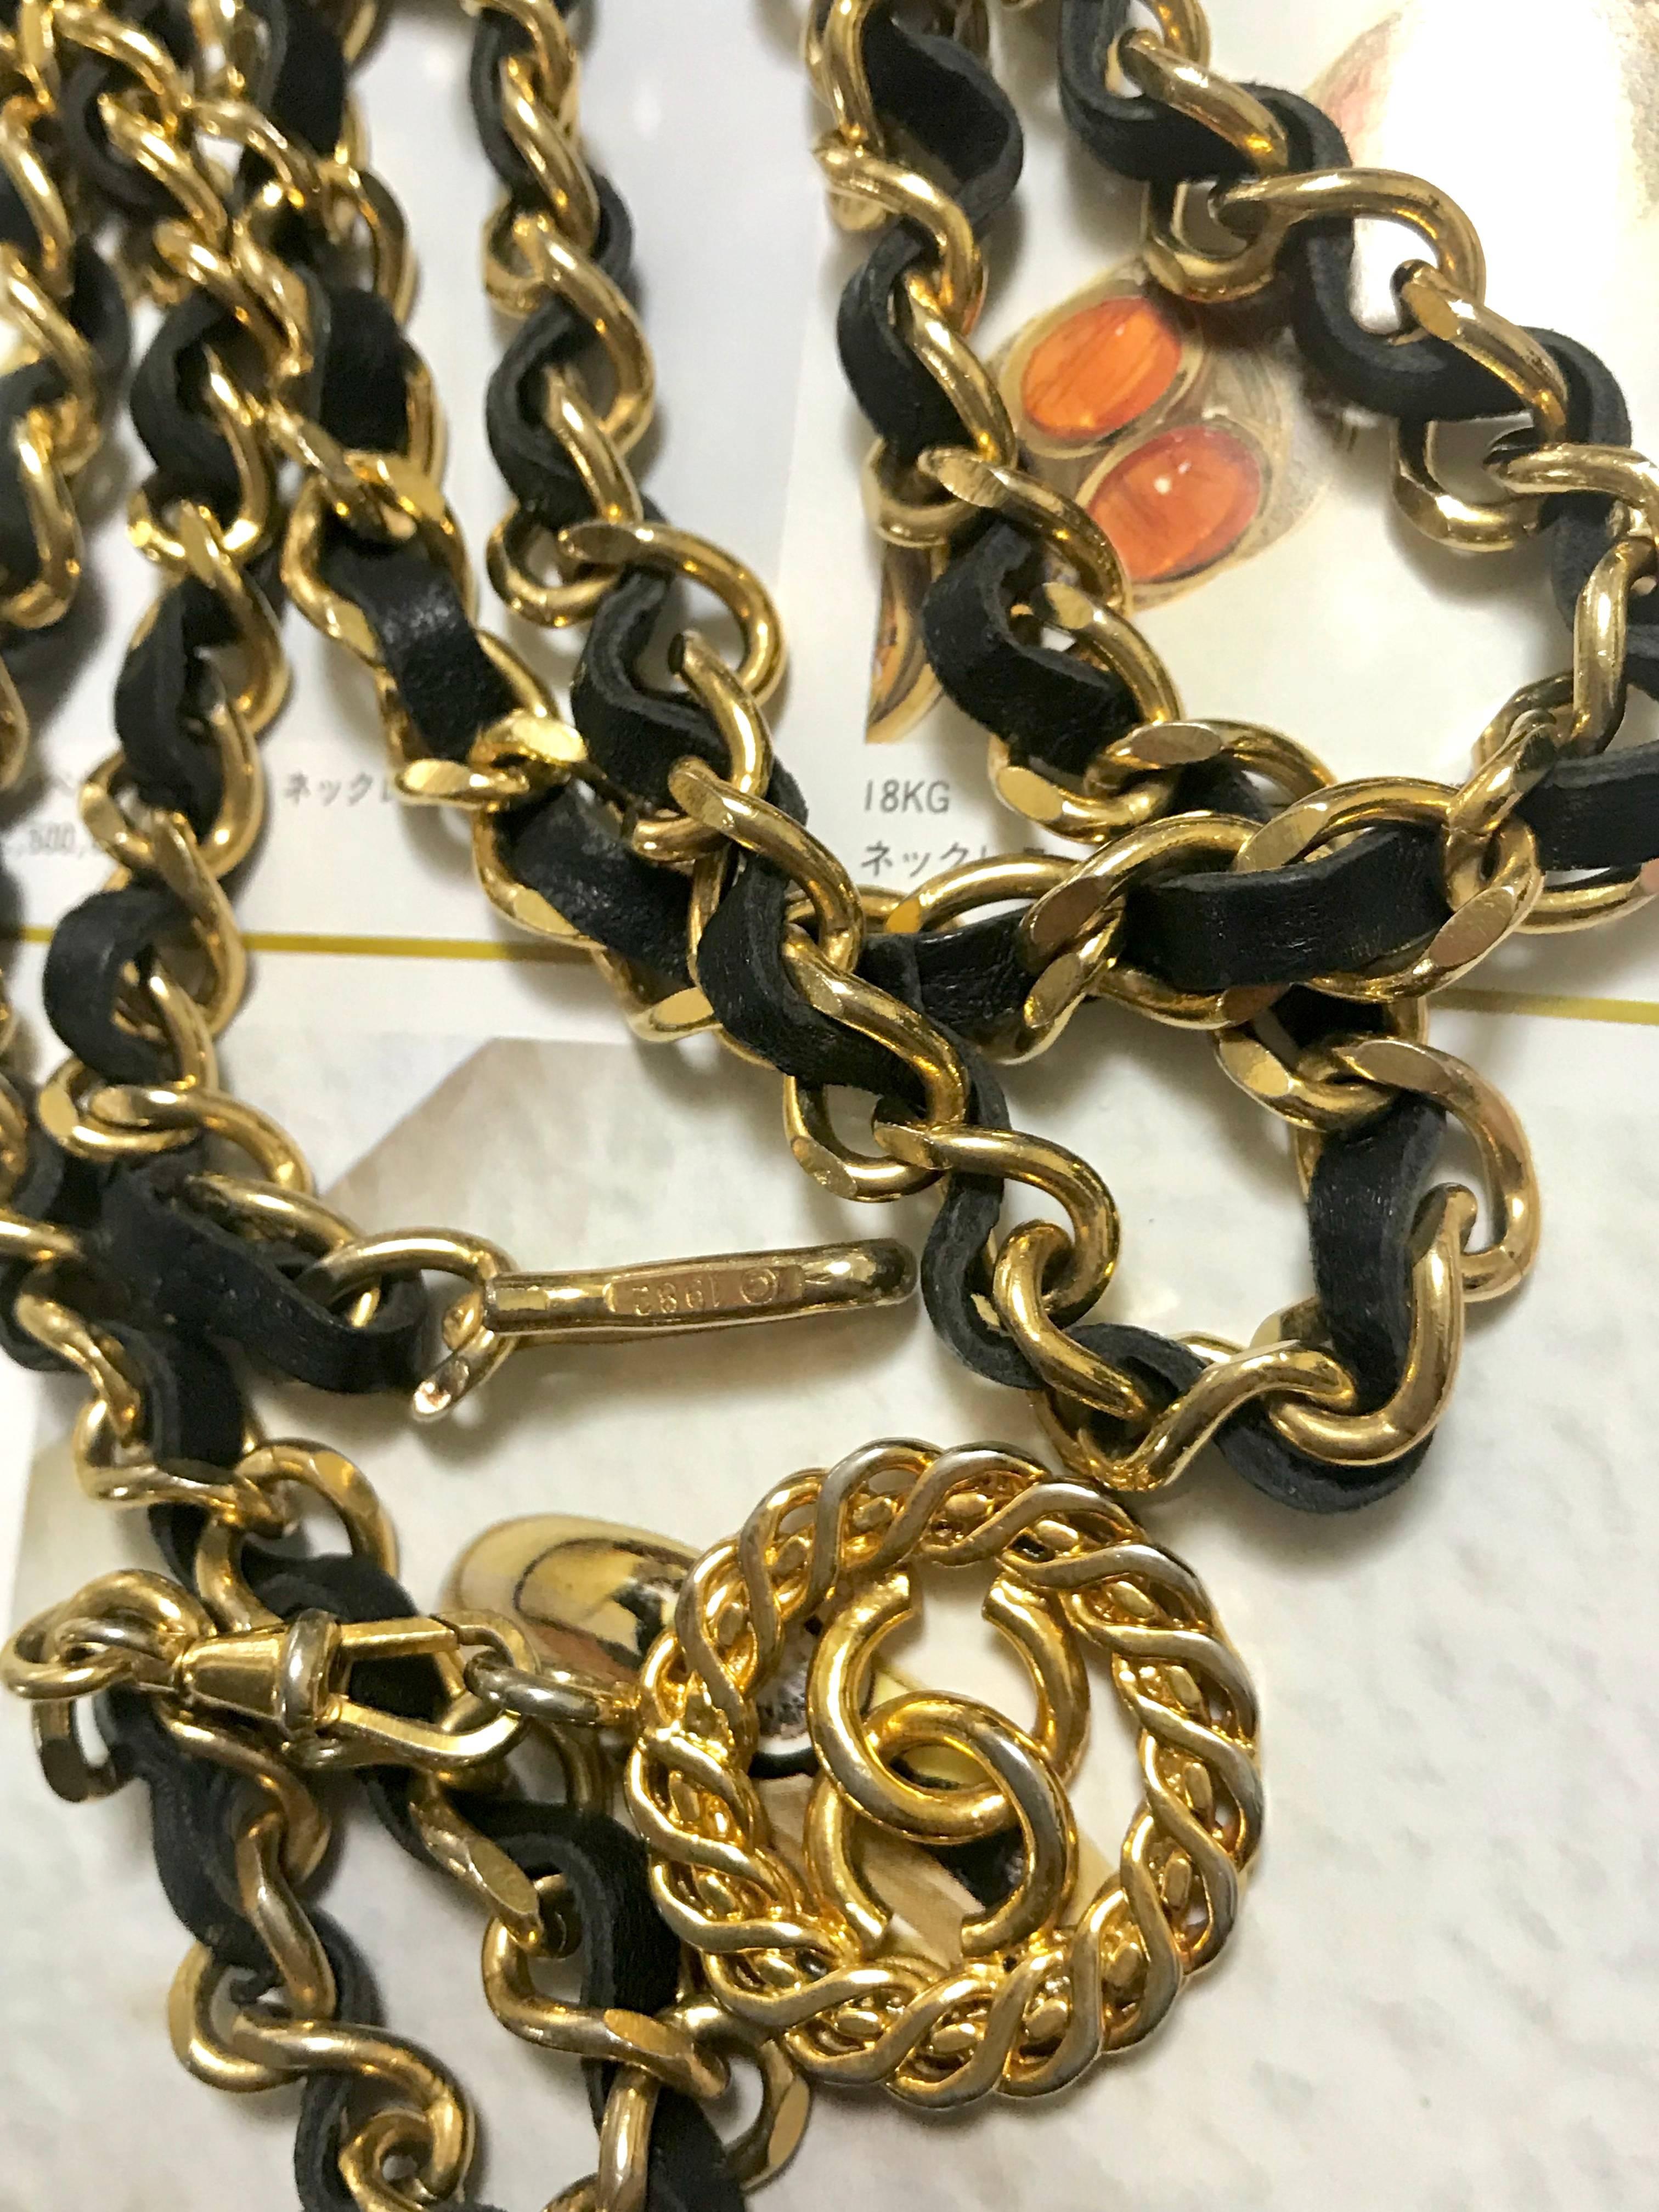 Vintage CHANEL golden chain and black belt/necklace with flower CC mark charm.  2